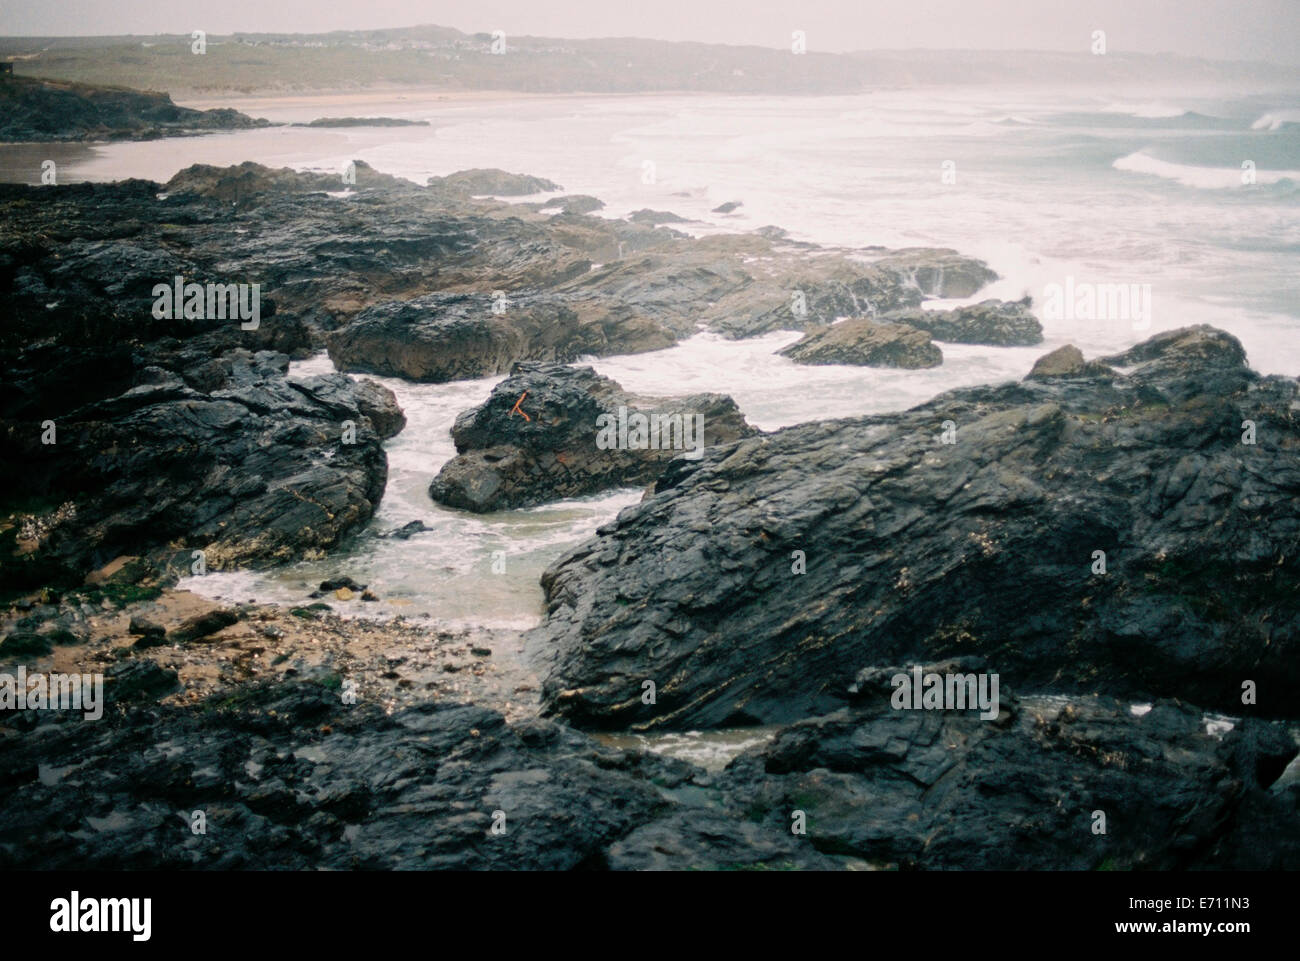 Rocks on the beach by the sea. Waves breaking and mist rising. Stock Photo